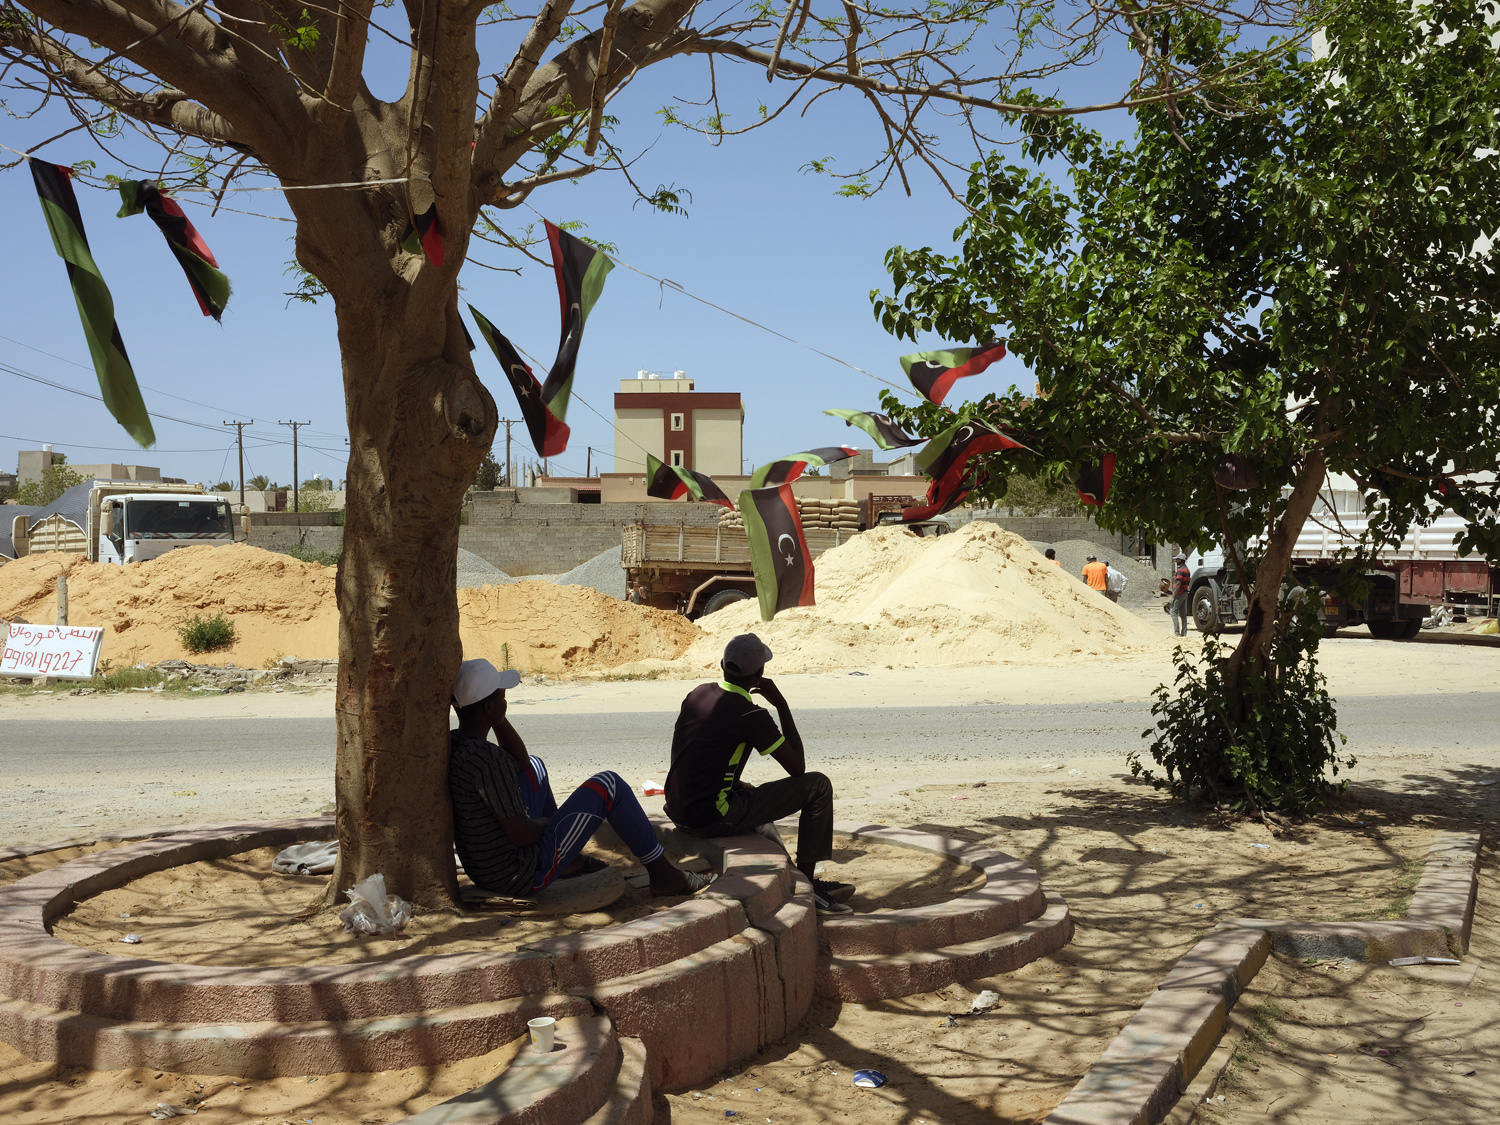 Tripoli, Libya 05/04/2021Across the street from a large construction sight African day laborers take shade under a tree. Jehad Nga